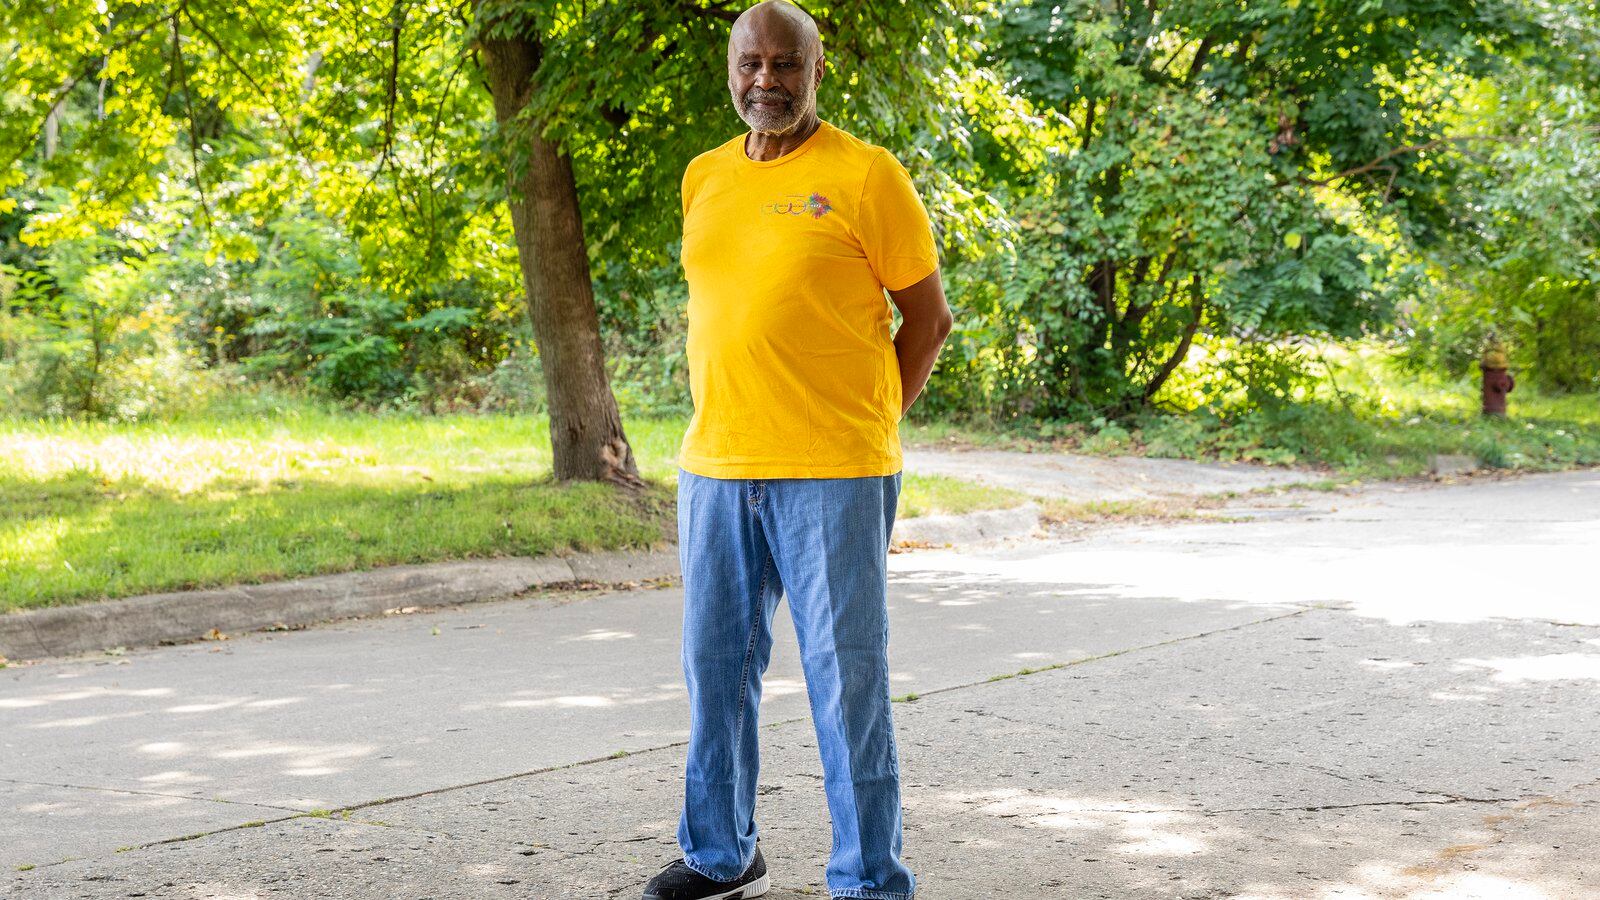 An adult man wearing a yellow shirt and blue jeans poses for a portrait in the middle of a street with green trees and grass in the background.